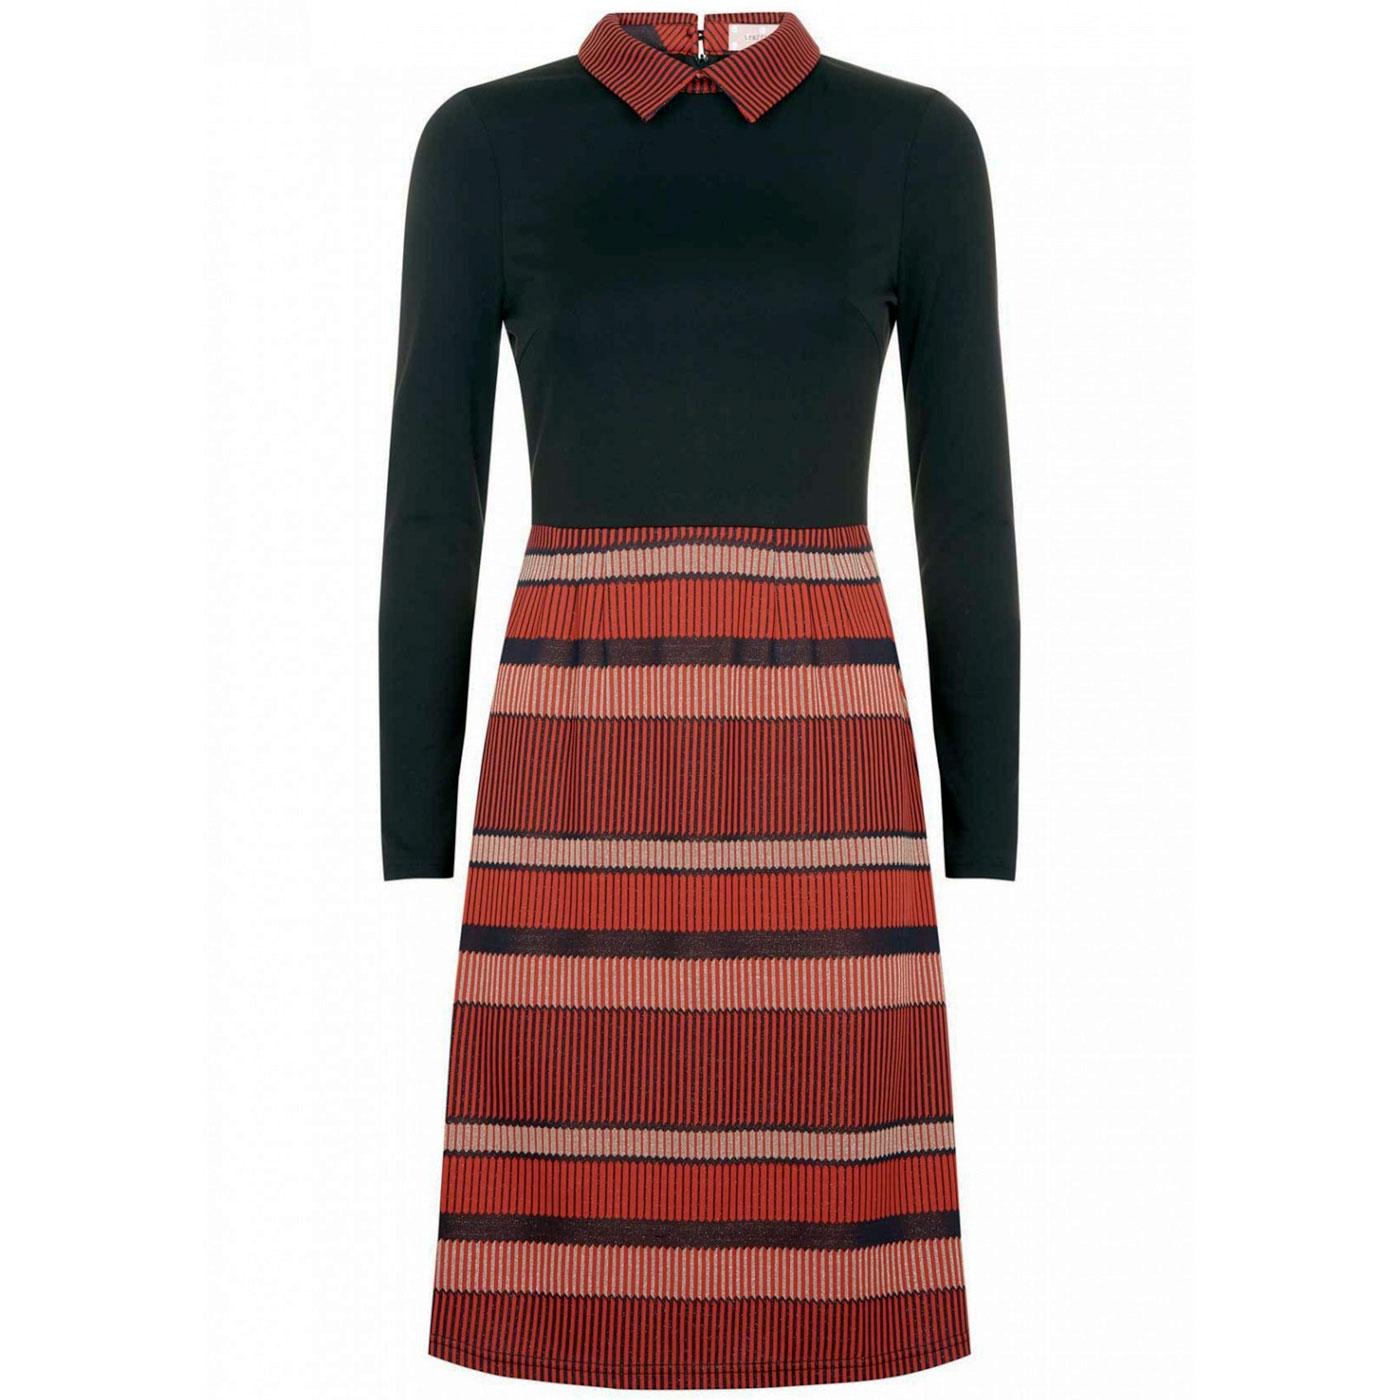 TRAFFIC PEOPLE Top 'n' Tail Retro Mod Dress in Red